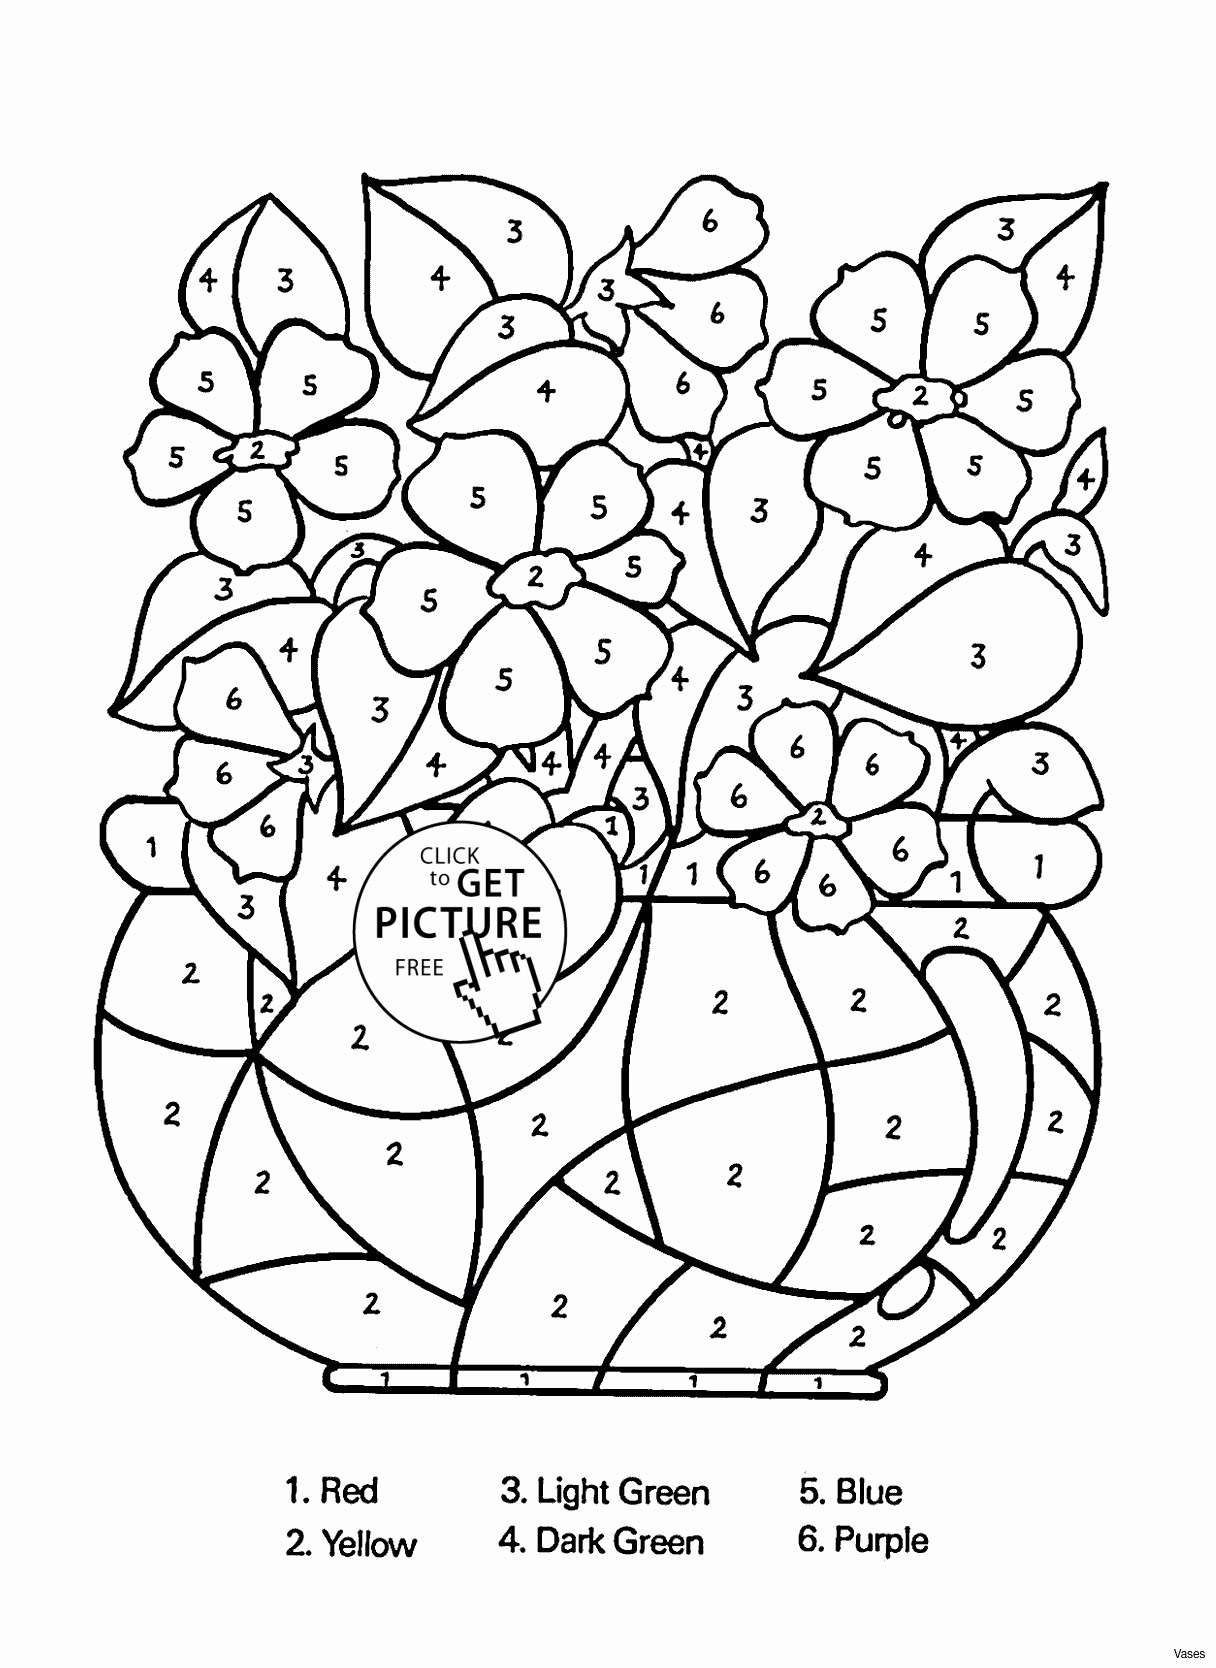 cheap ceramic vases of white glass vase elegant vases flower vase coloring page pages inside white glass vase elegant vases flower vase coloring page pages flowers in a top i 0d